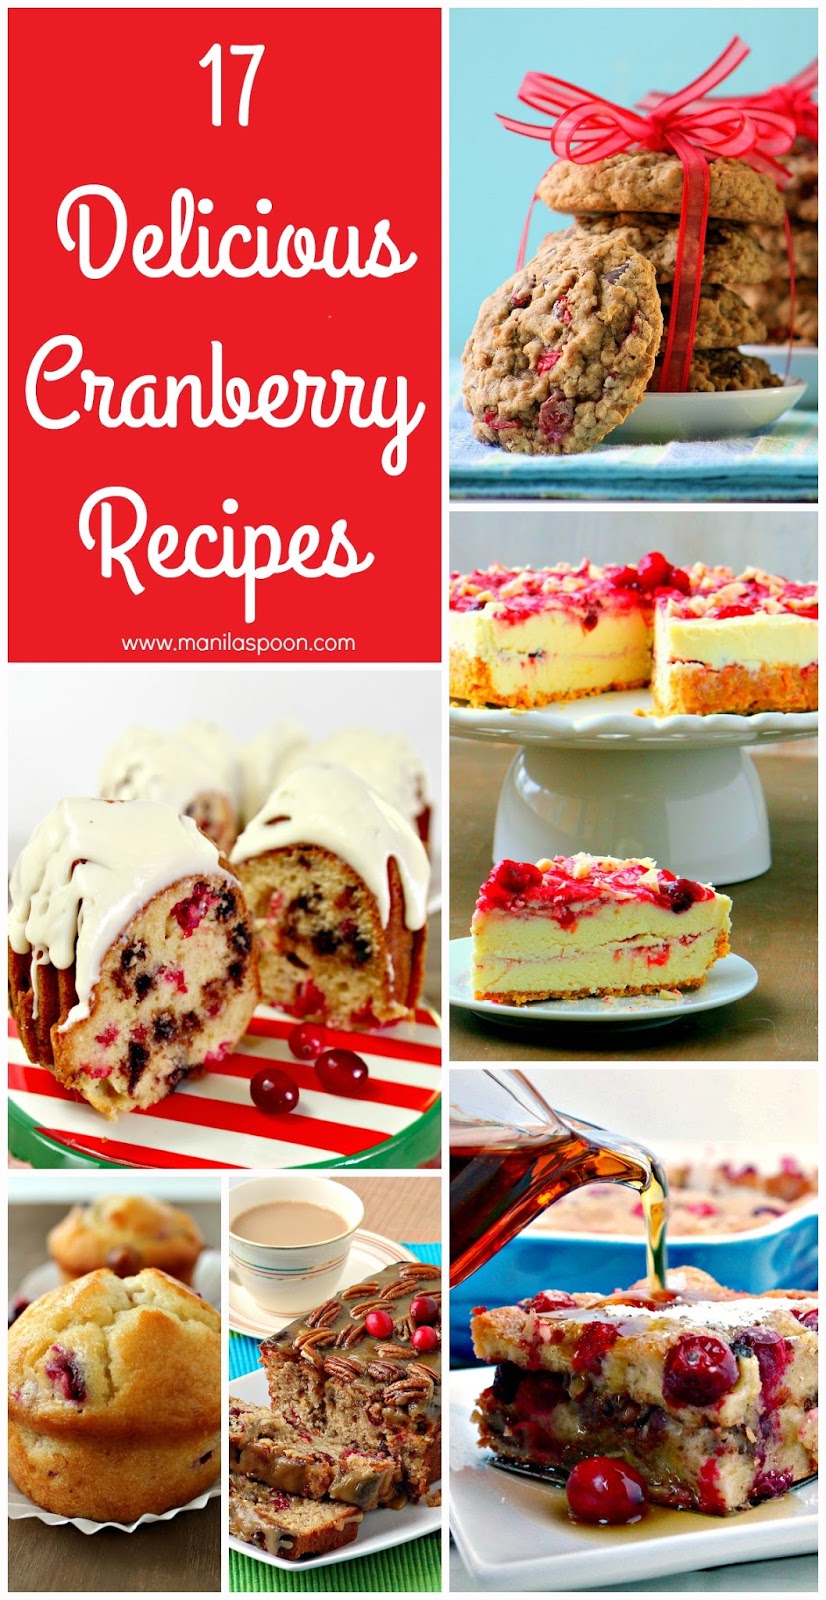 A collection of our tried and tested, delicious family favorite cranberry recipes. One stop shop for all your cranberry cravings!| manilaspoon.com